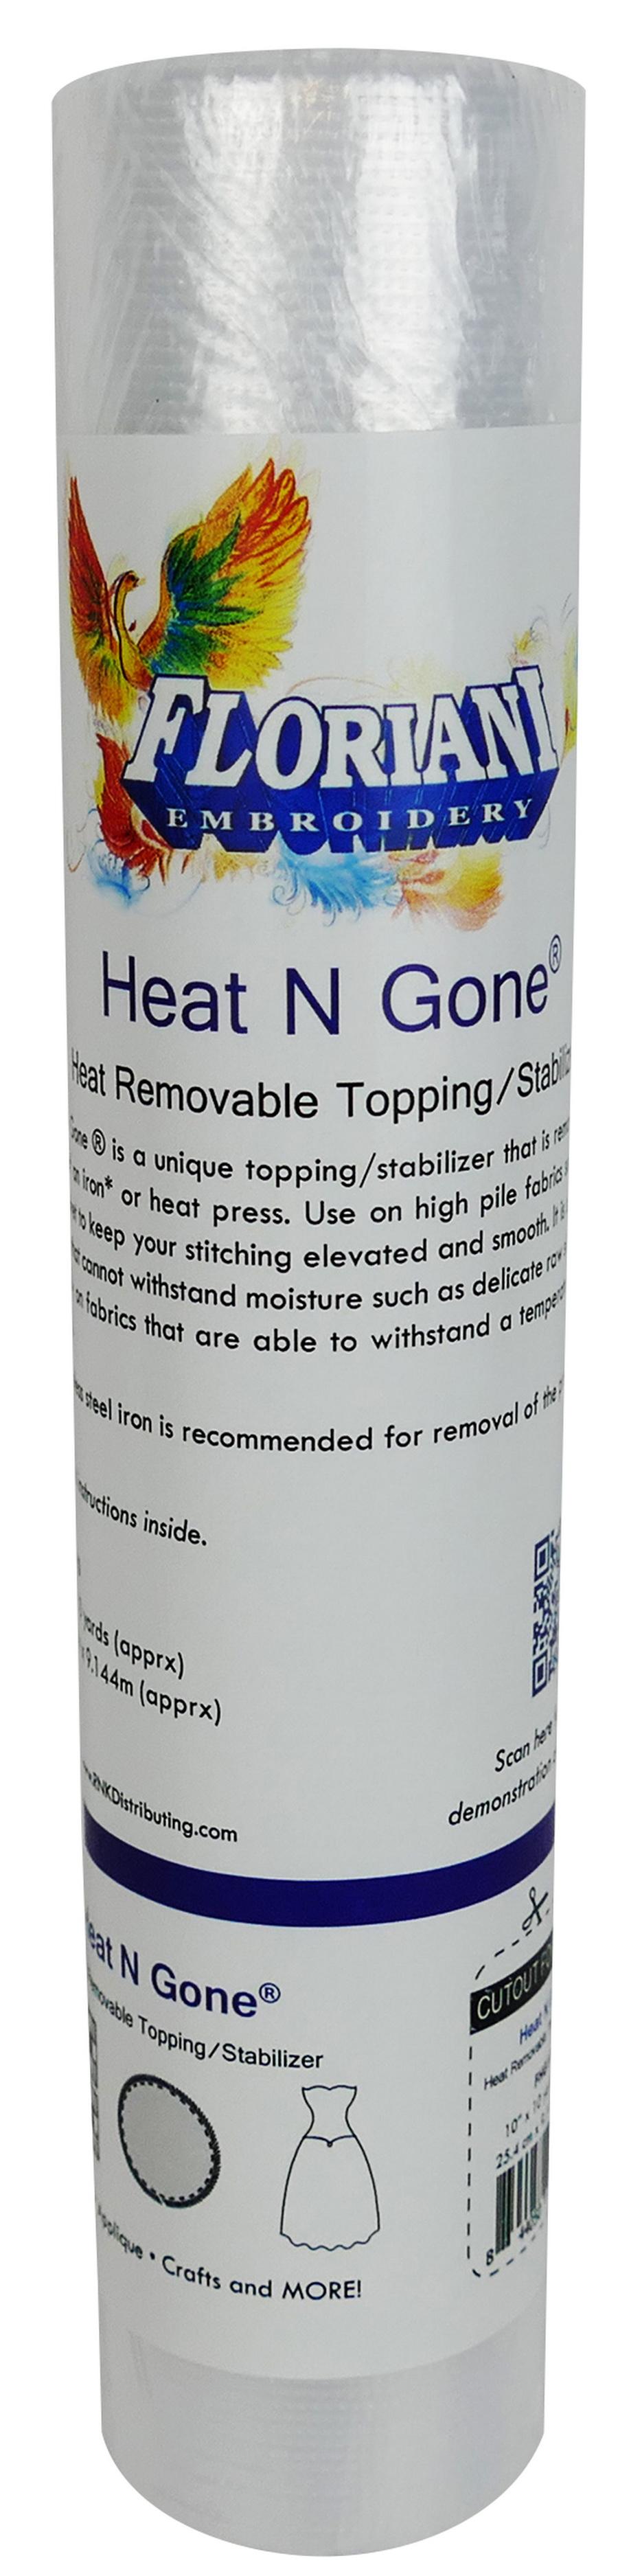 Floriani Heat N Gone Heat Removable Topping and Stabilizer, 10in. x 10yds